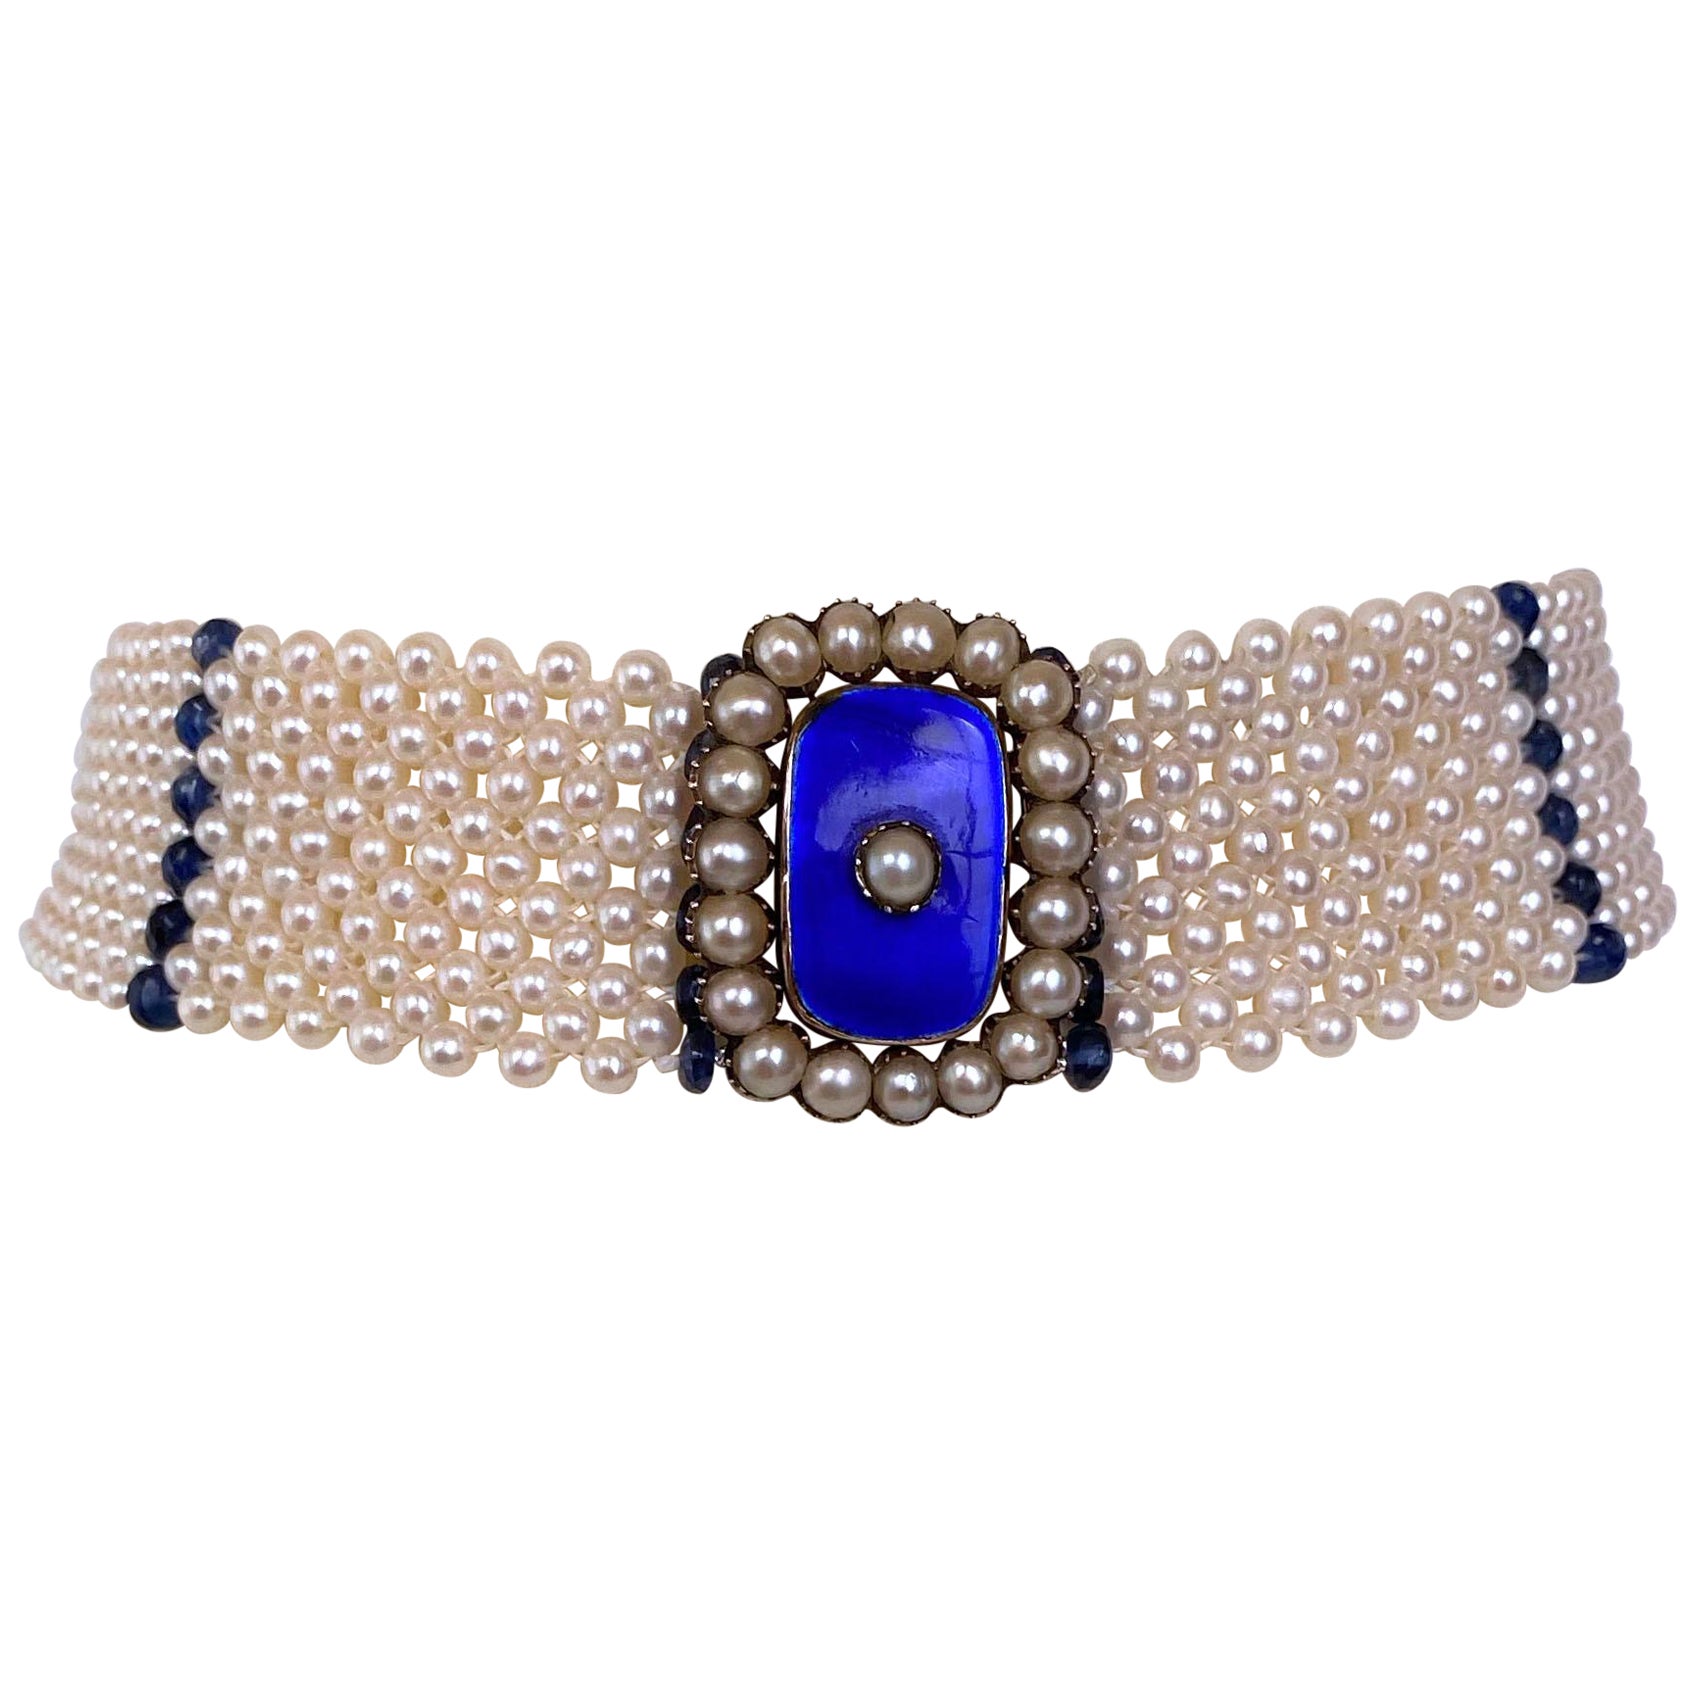 Marina J. Pearl & Sapphire Choker with Vintage Centerpiece and 14K White Gold